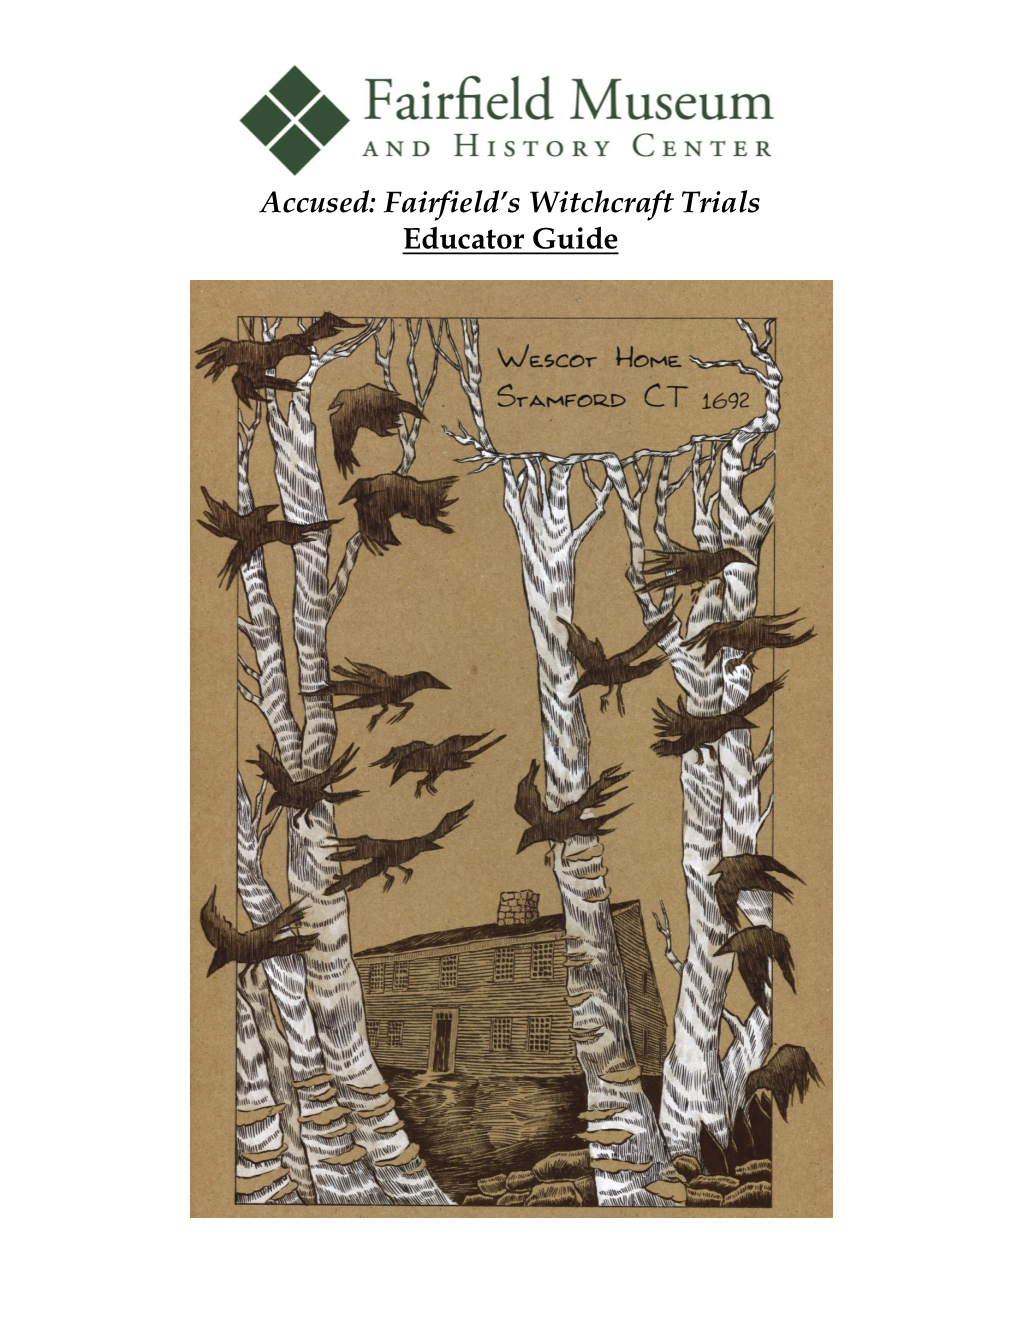 Accused: Fairfield's Witchcraft Trials Educator Guide